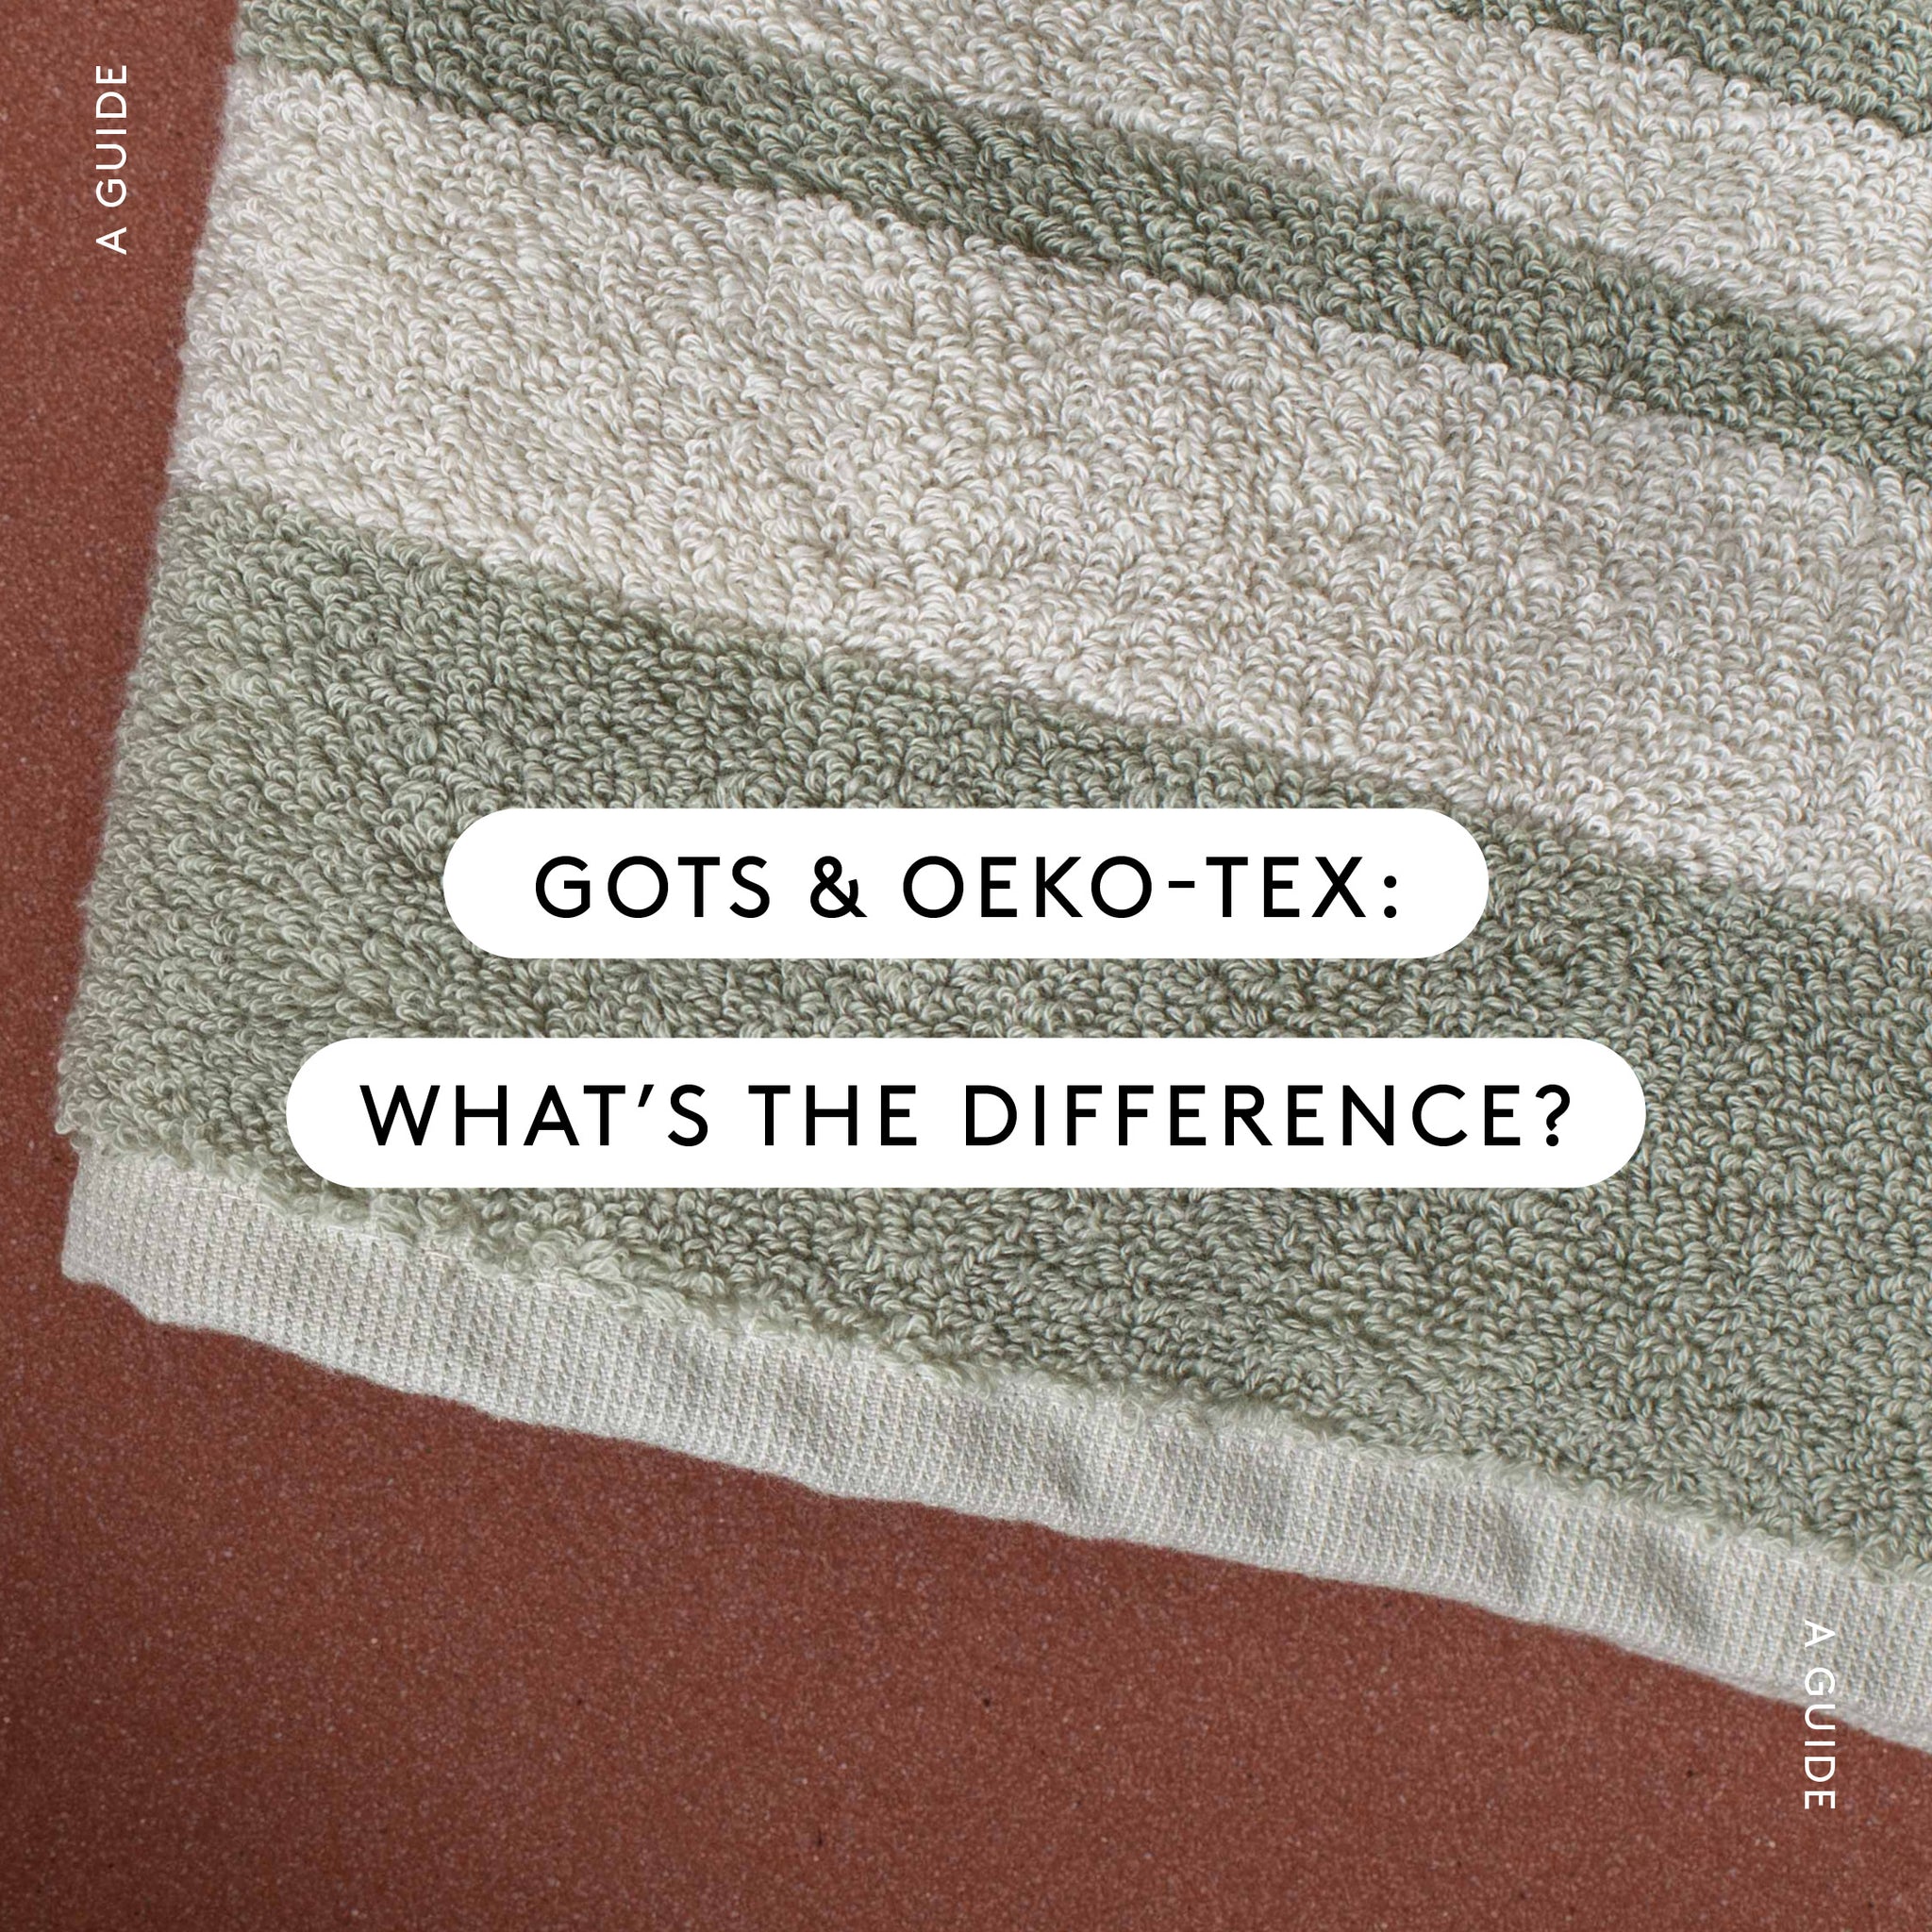 GOTS & OEKO-TEX: What's the Difference?